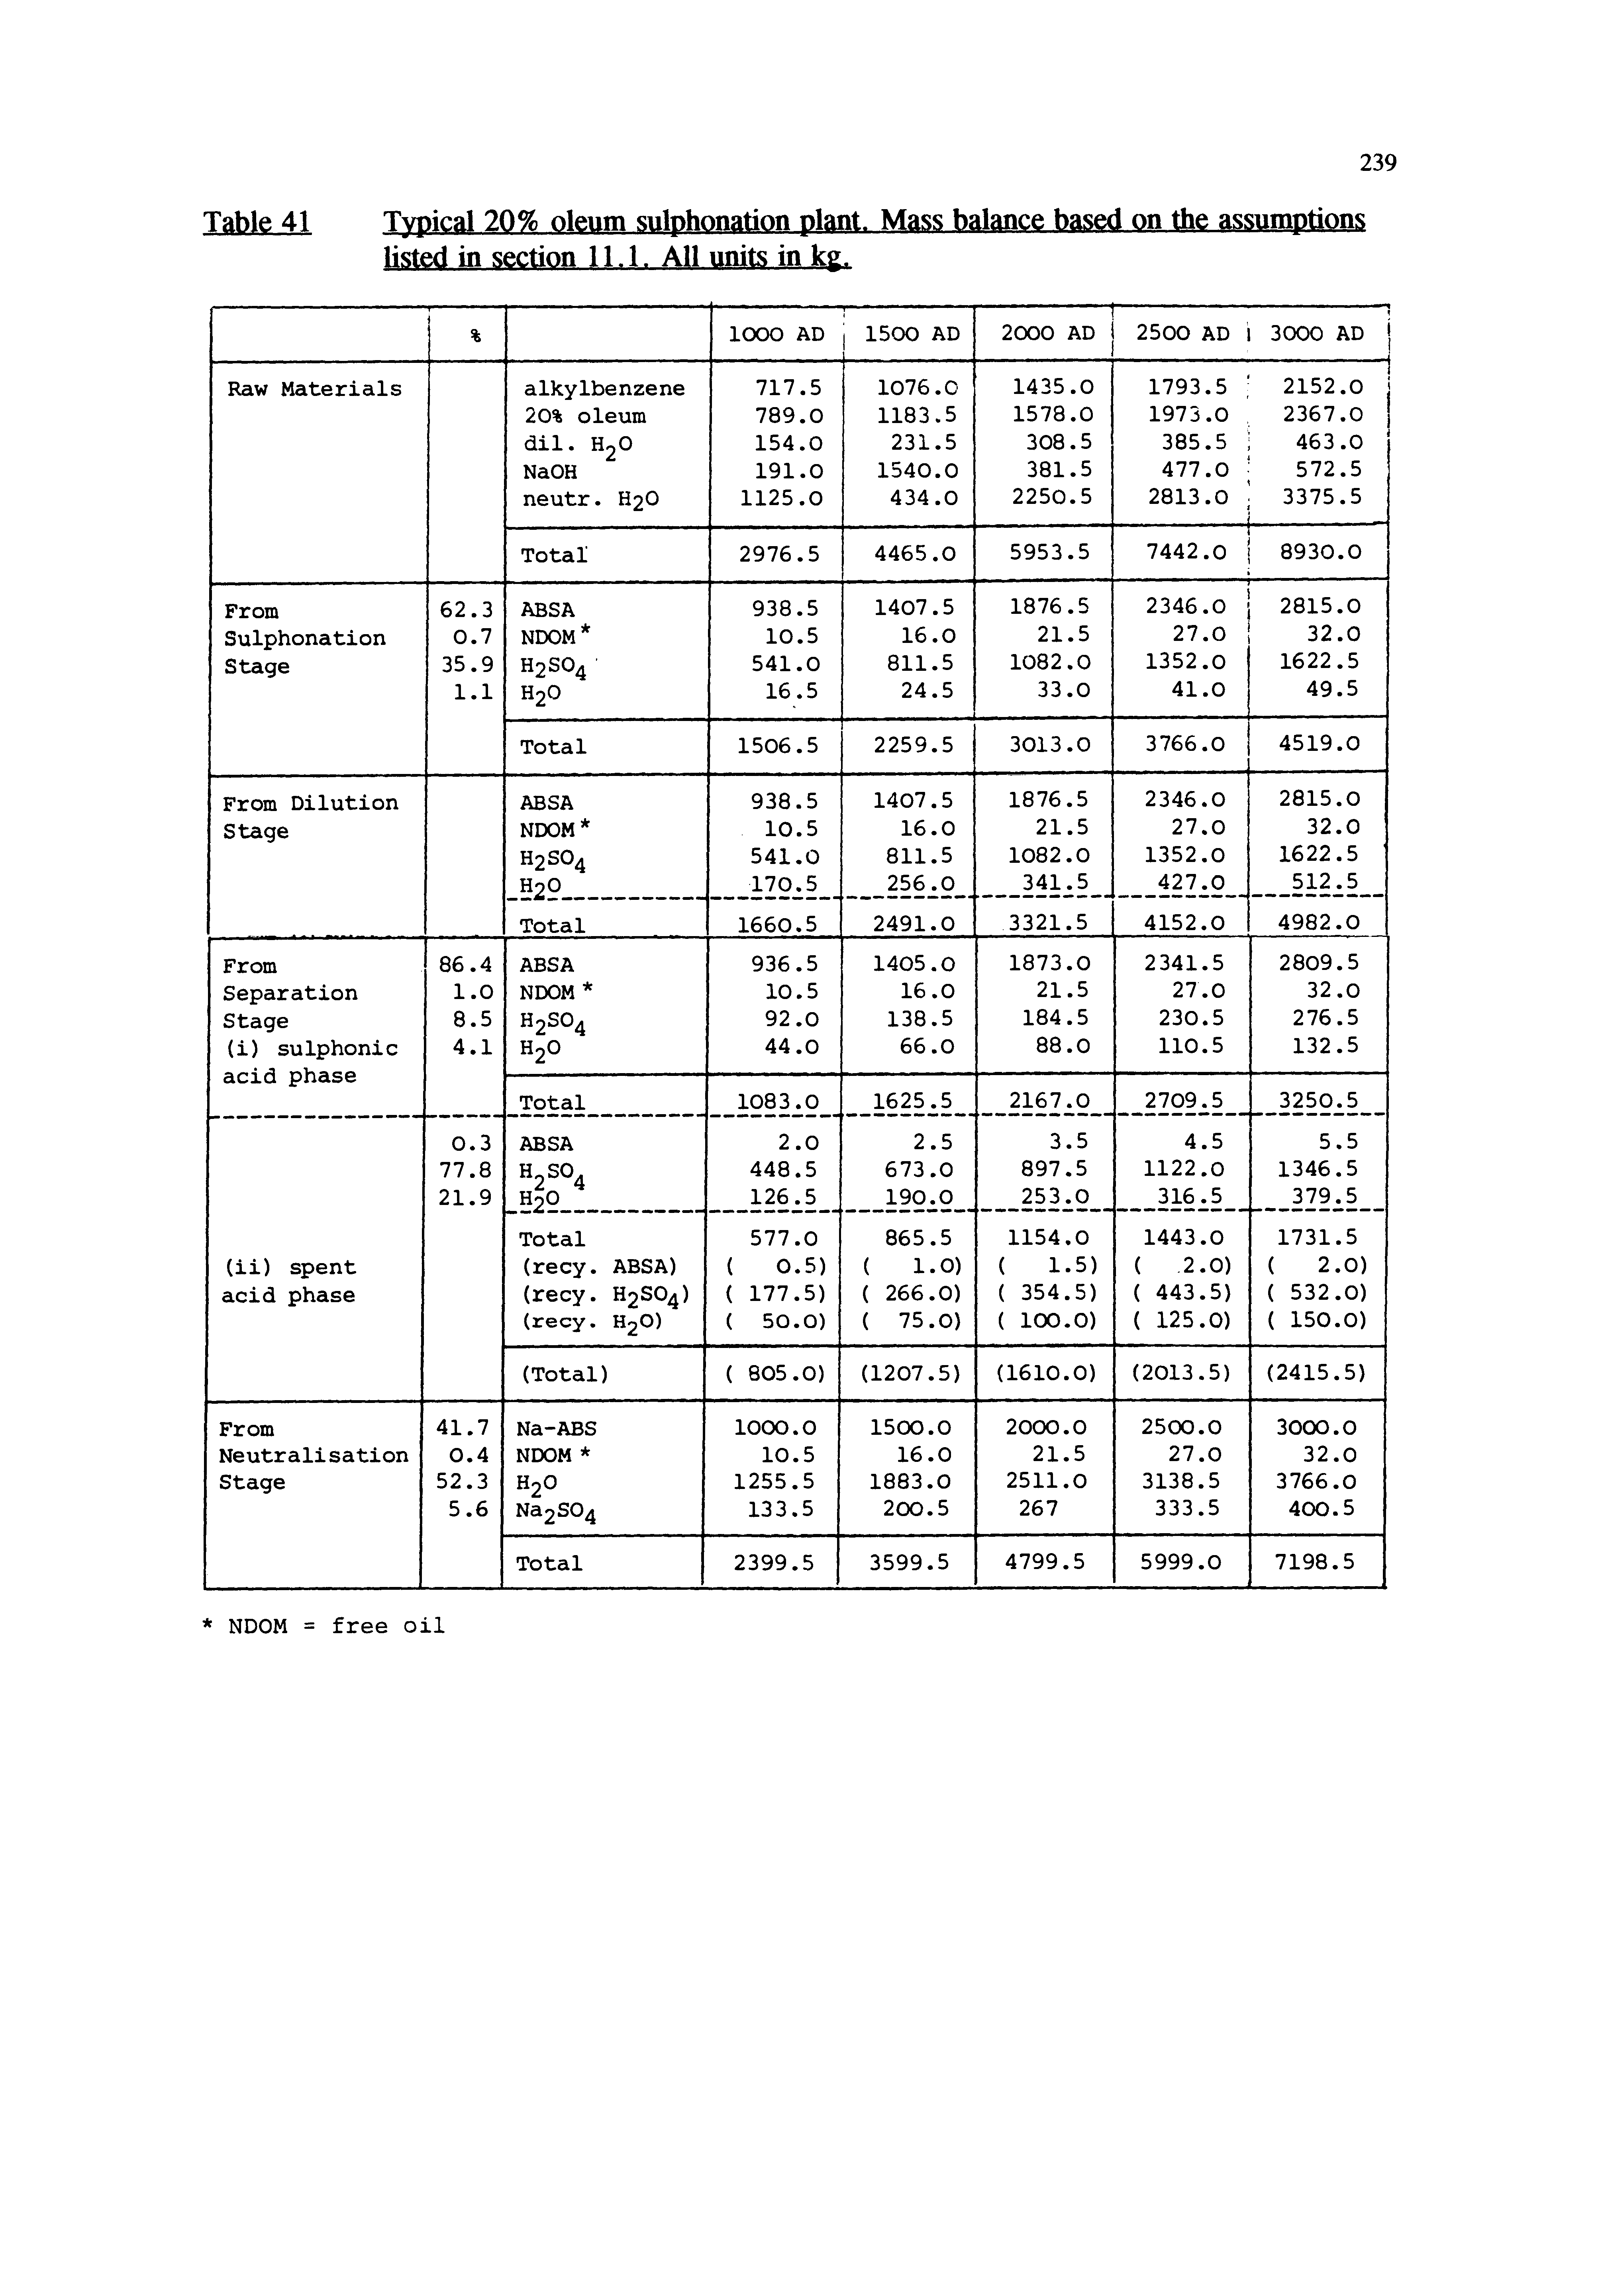 Table 41 Typical 20% oleum sulphonation plant. Mass balance based on the assumptions listed in section 11.1. All units in kg.